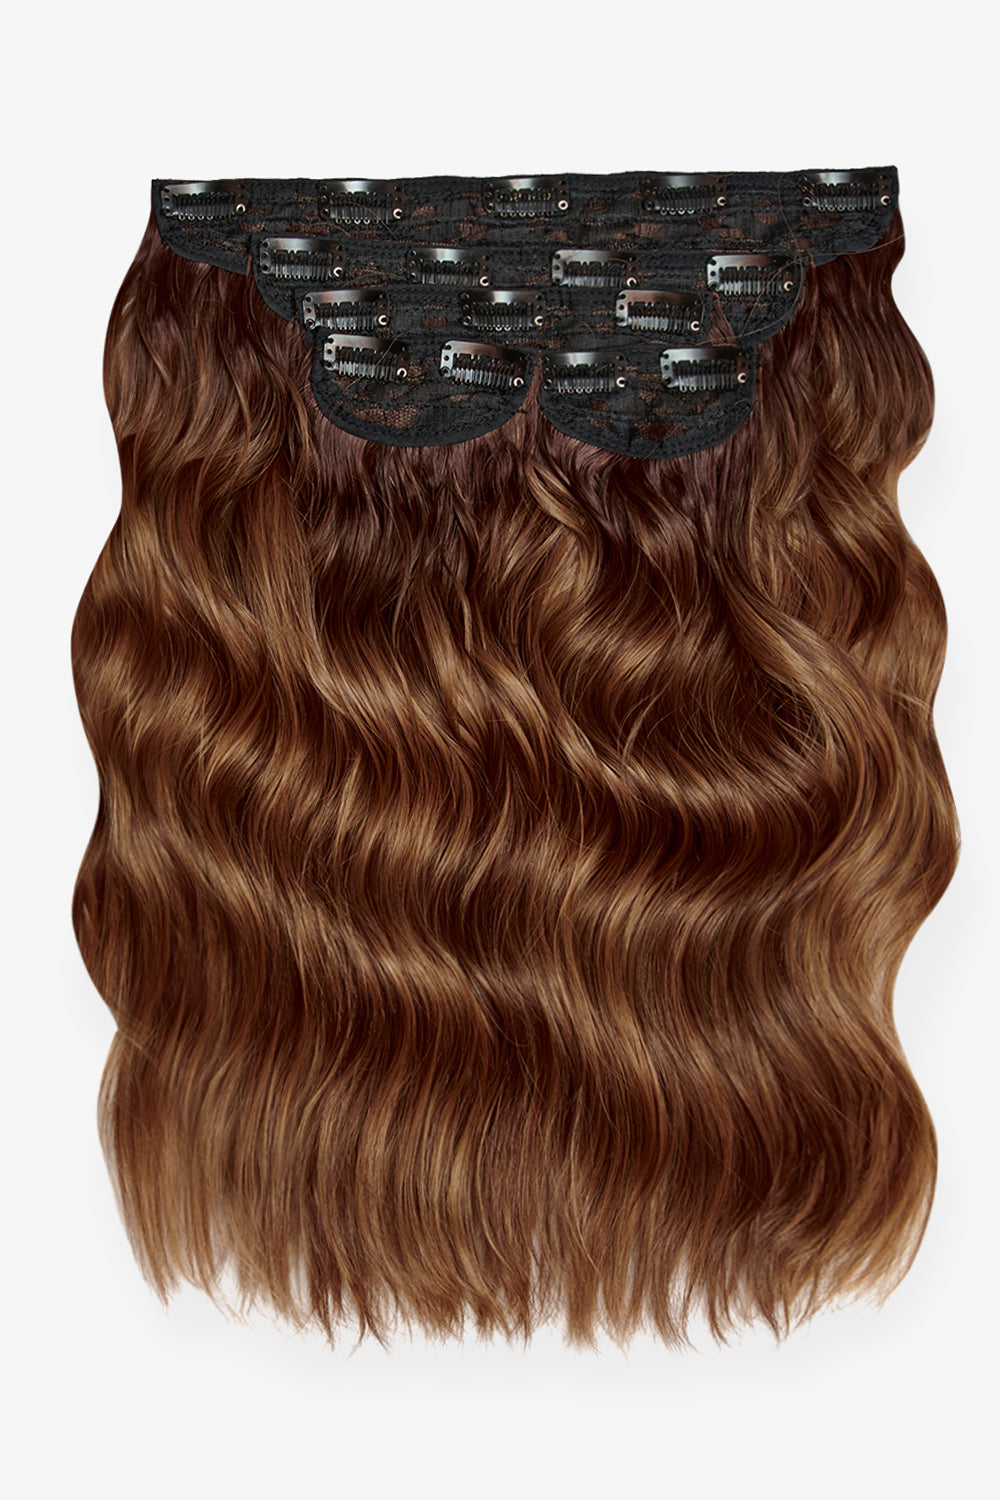 Super Thick 16’’ 5 Piece Brushed Out Wave Clip In Hair Extensions + Hair Care Bundle - Rooted Mellow Brown